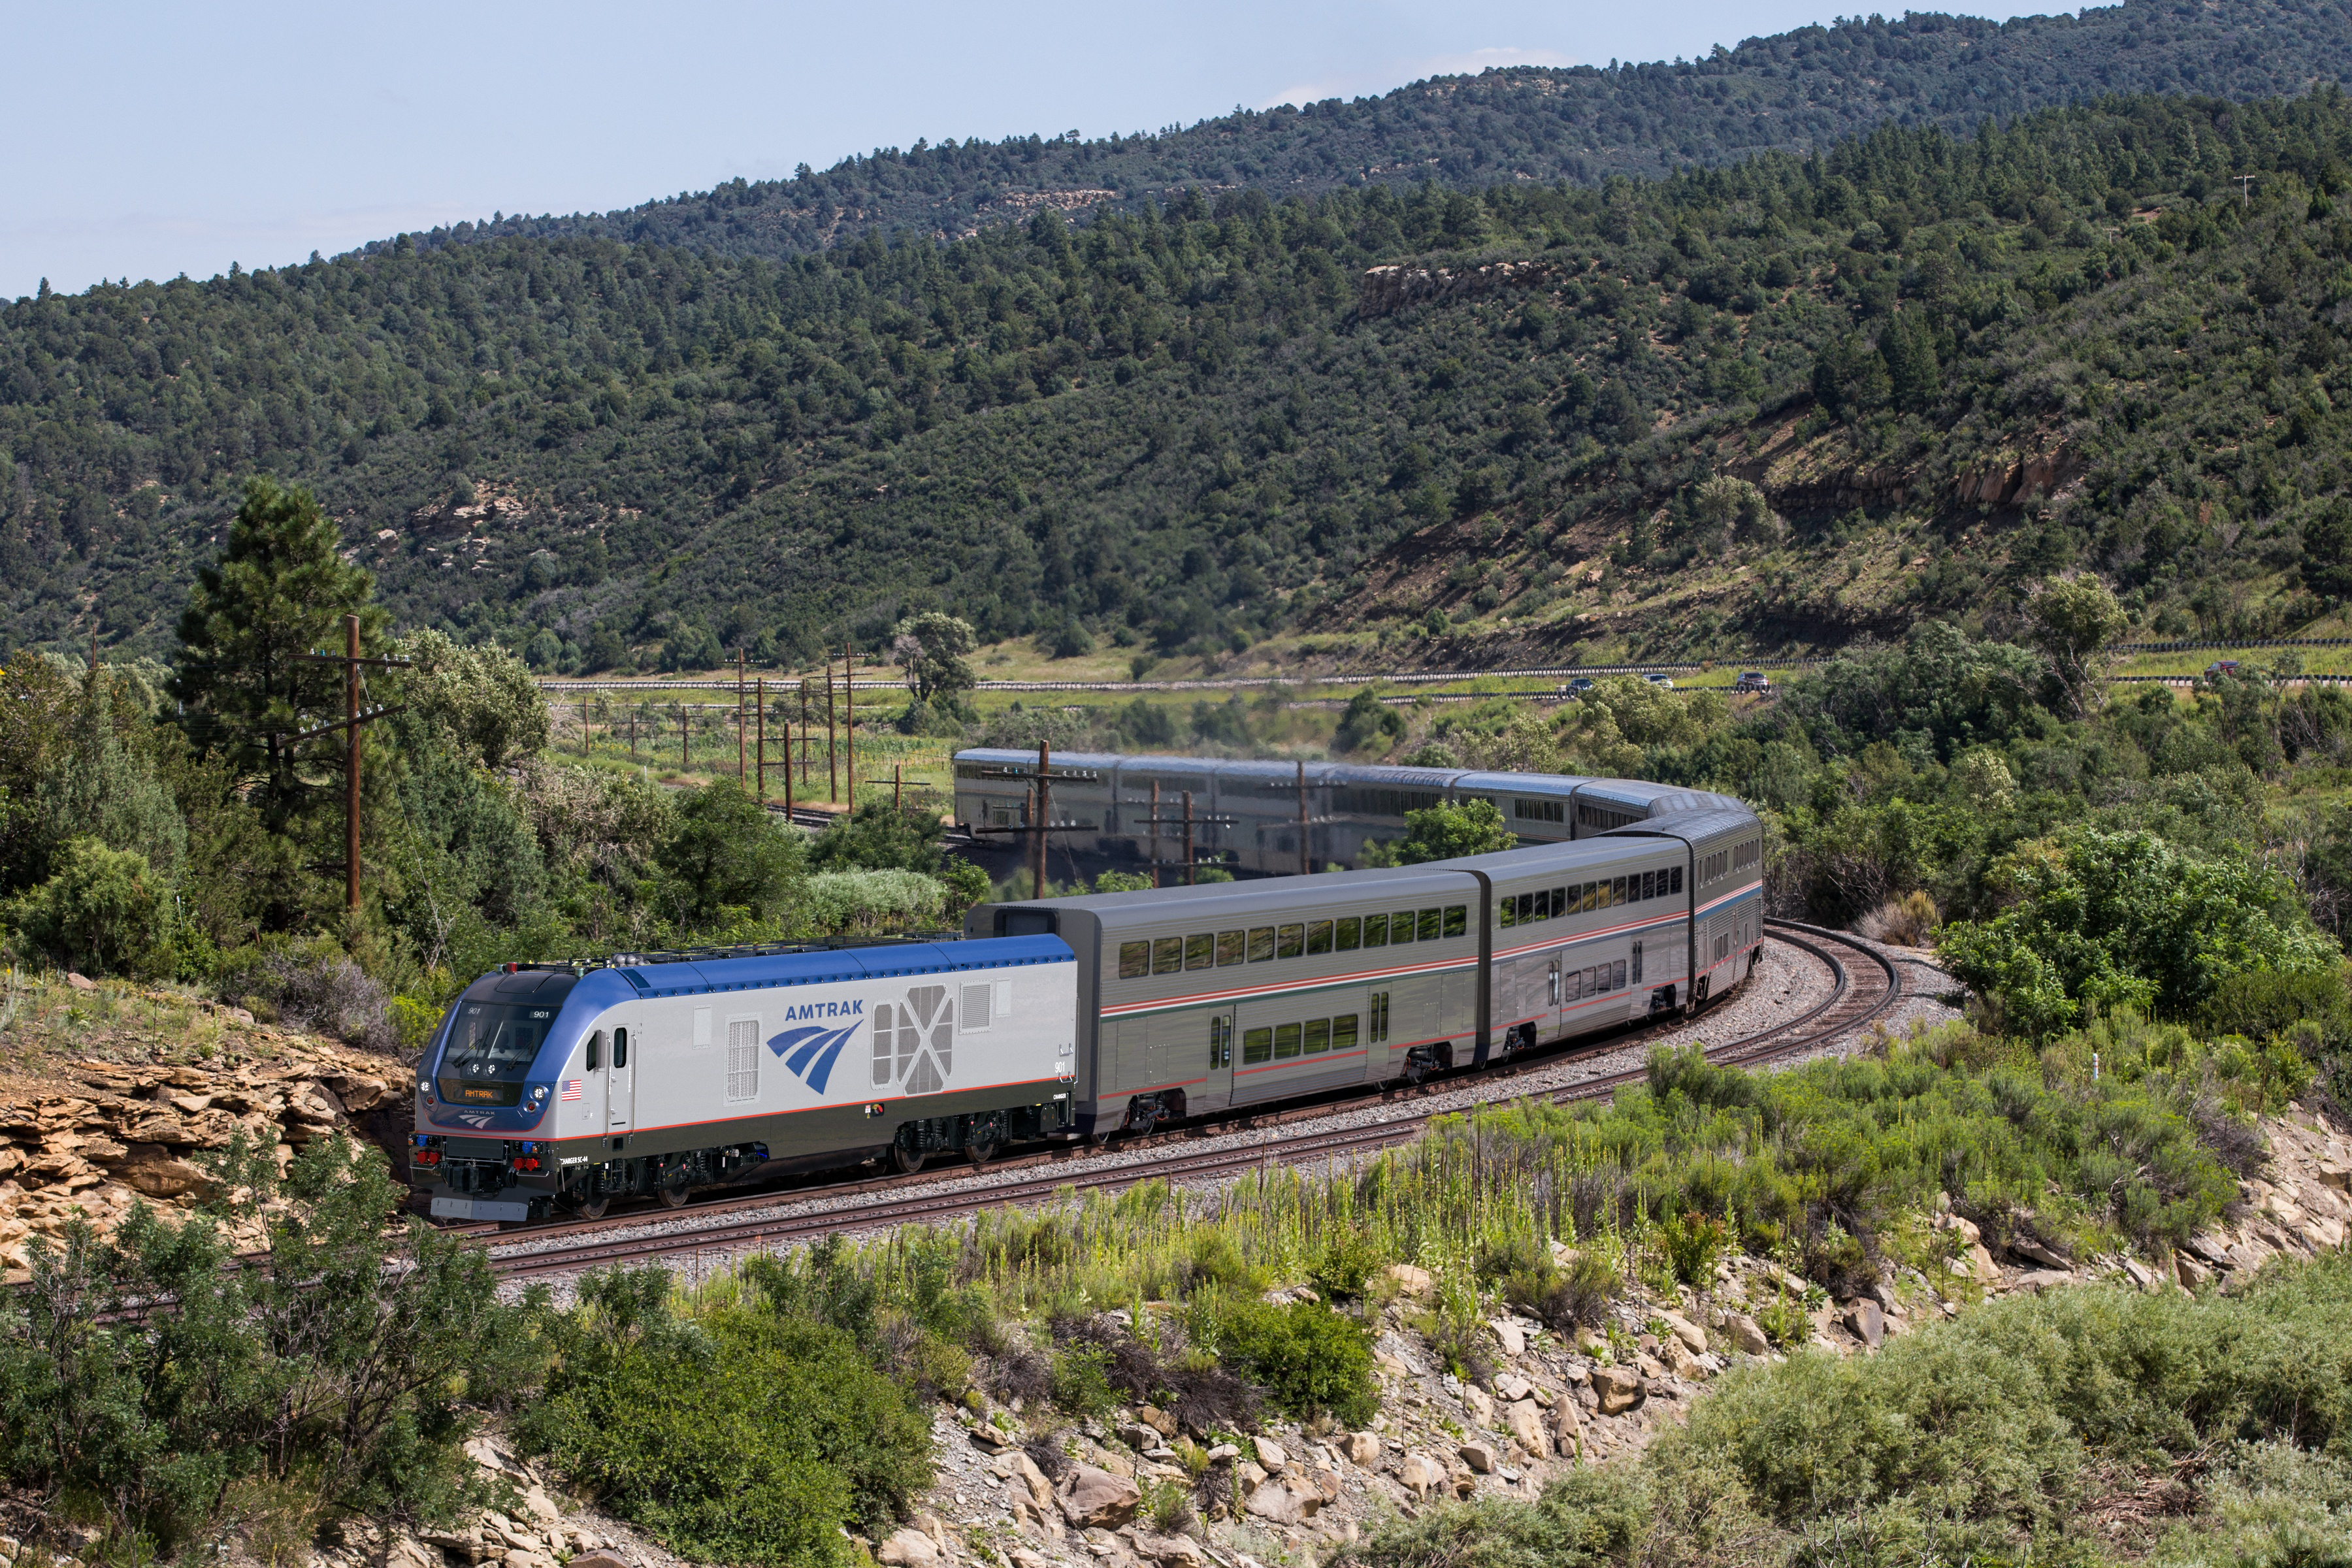 New Locomotives Aid in Mission to Provide World-Class Technology to Amtrak Customers